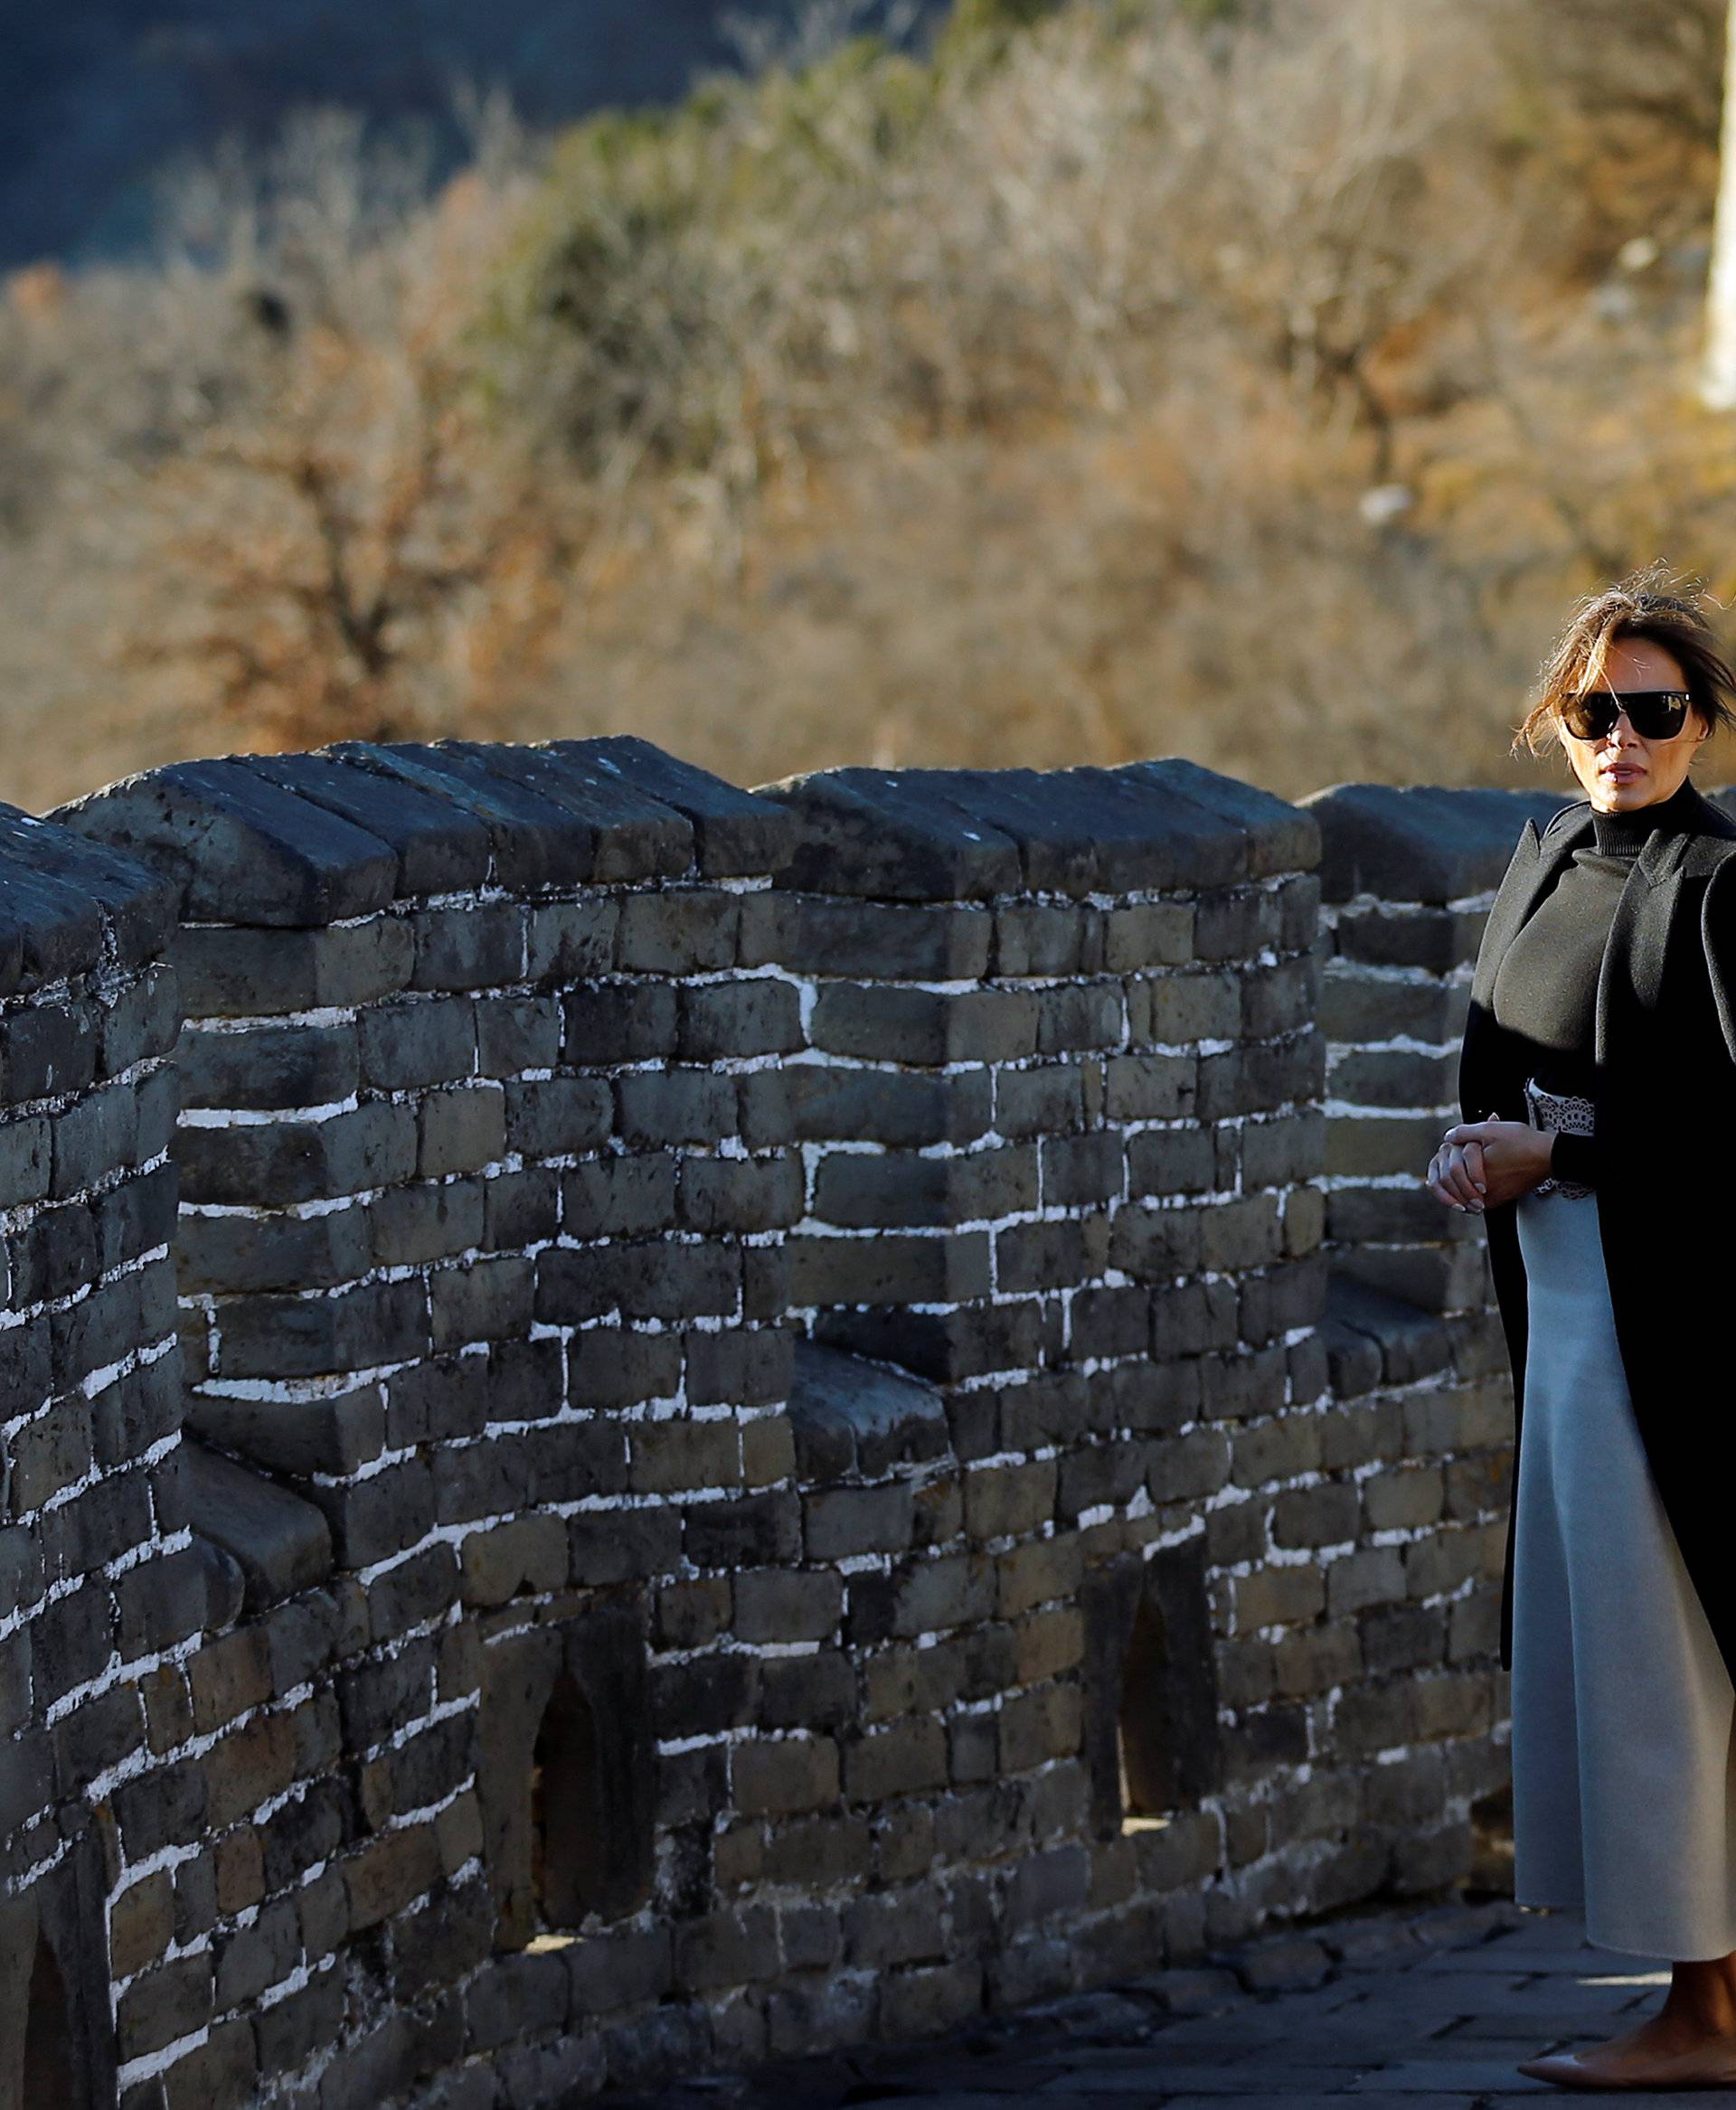 U.S. first lady Melania Trump visits the Mutianyu section of the Great Wall of China